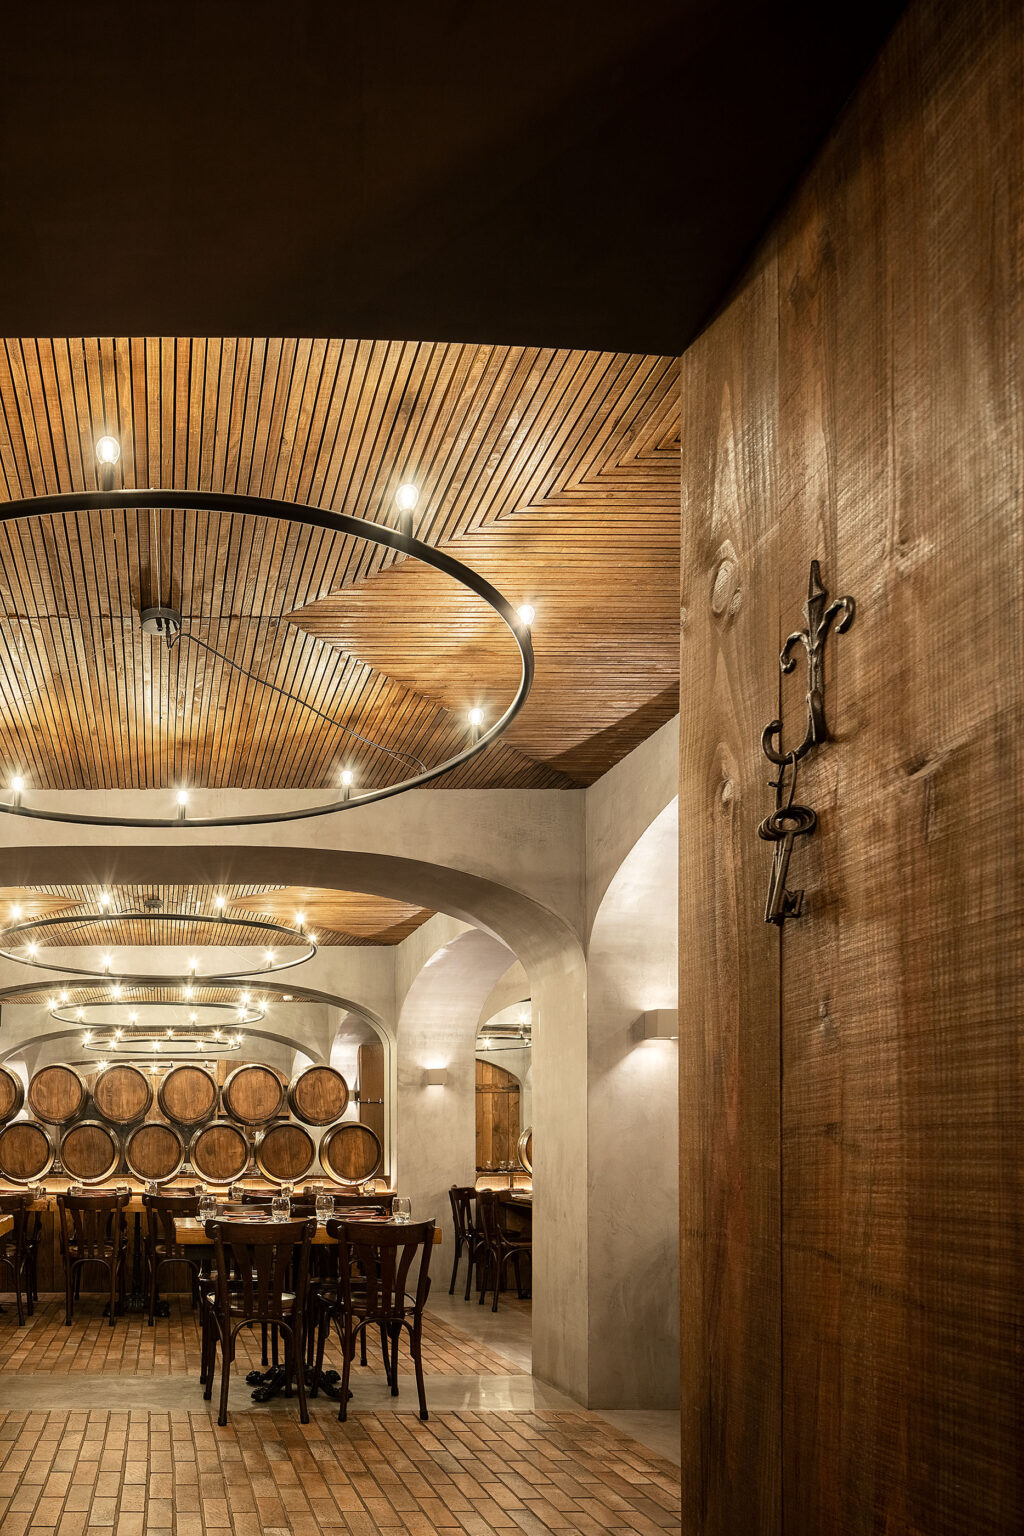 A unique experience in a cellar atmosphere. BARRIL restaurant. PAULO MERLINI architects